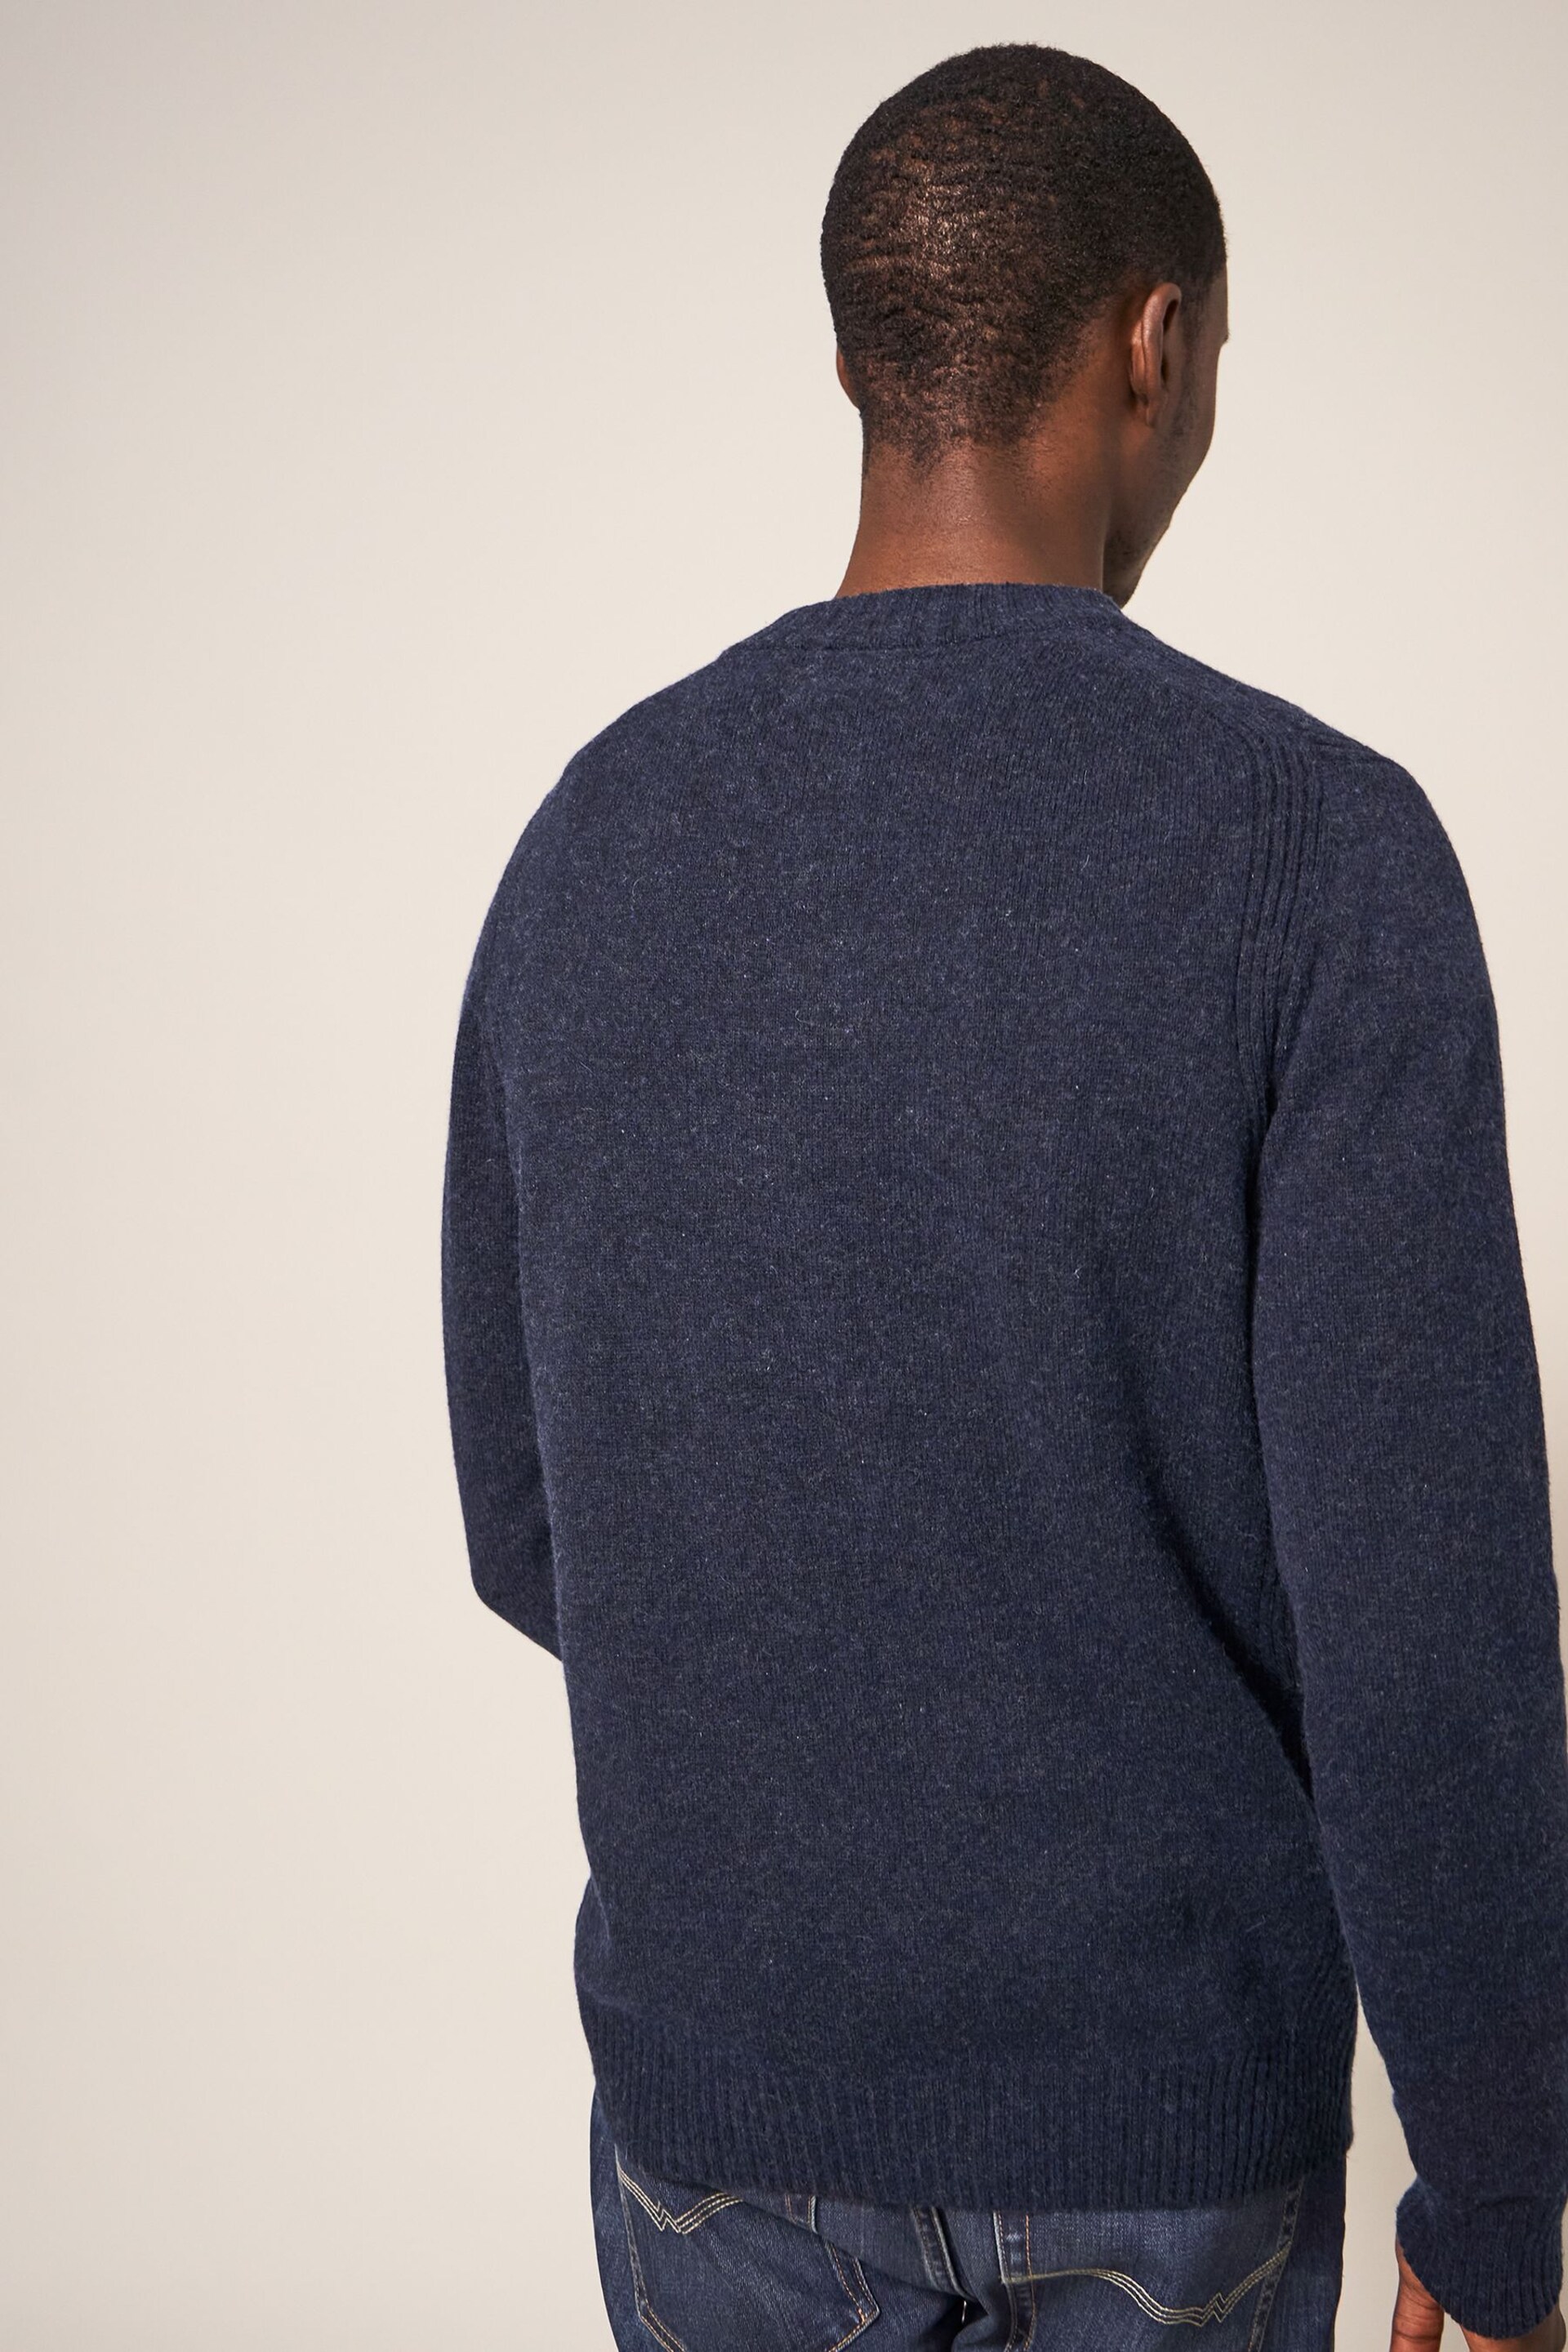 White Stuff Blue Lambswool Henley Jumper - Image 2 of 6